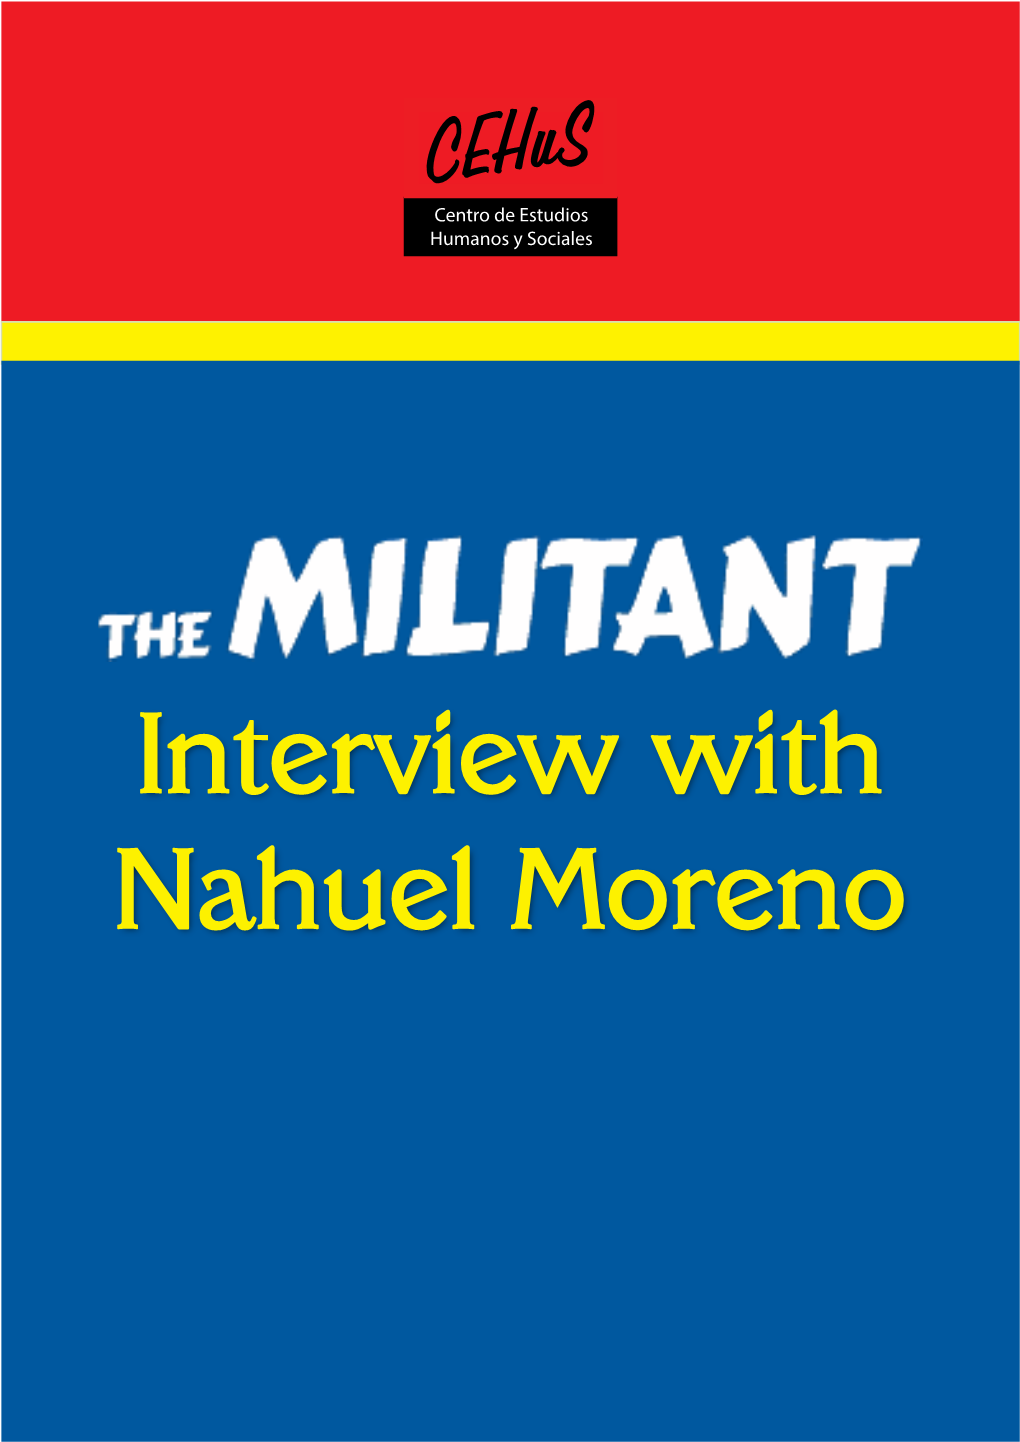 Interview with Nahuel Moreno the Militant: Interview with Nahuel Moreno